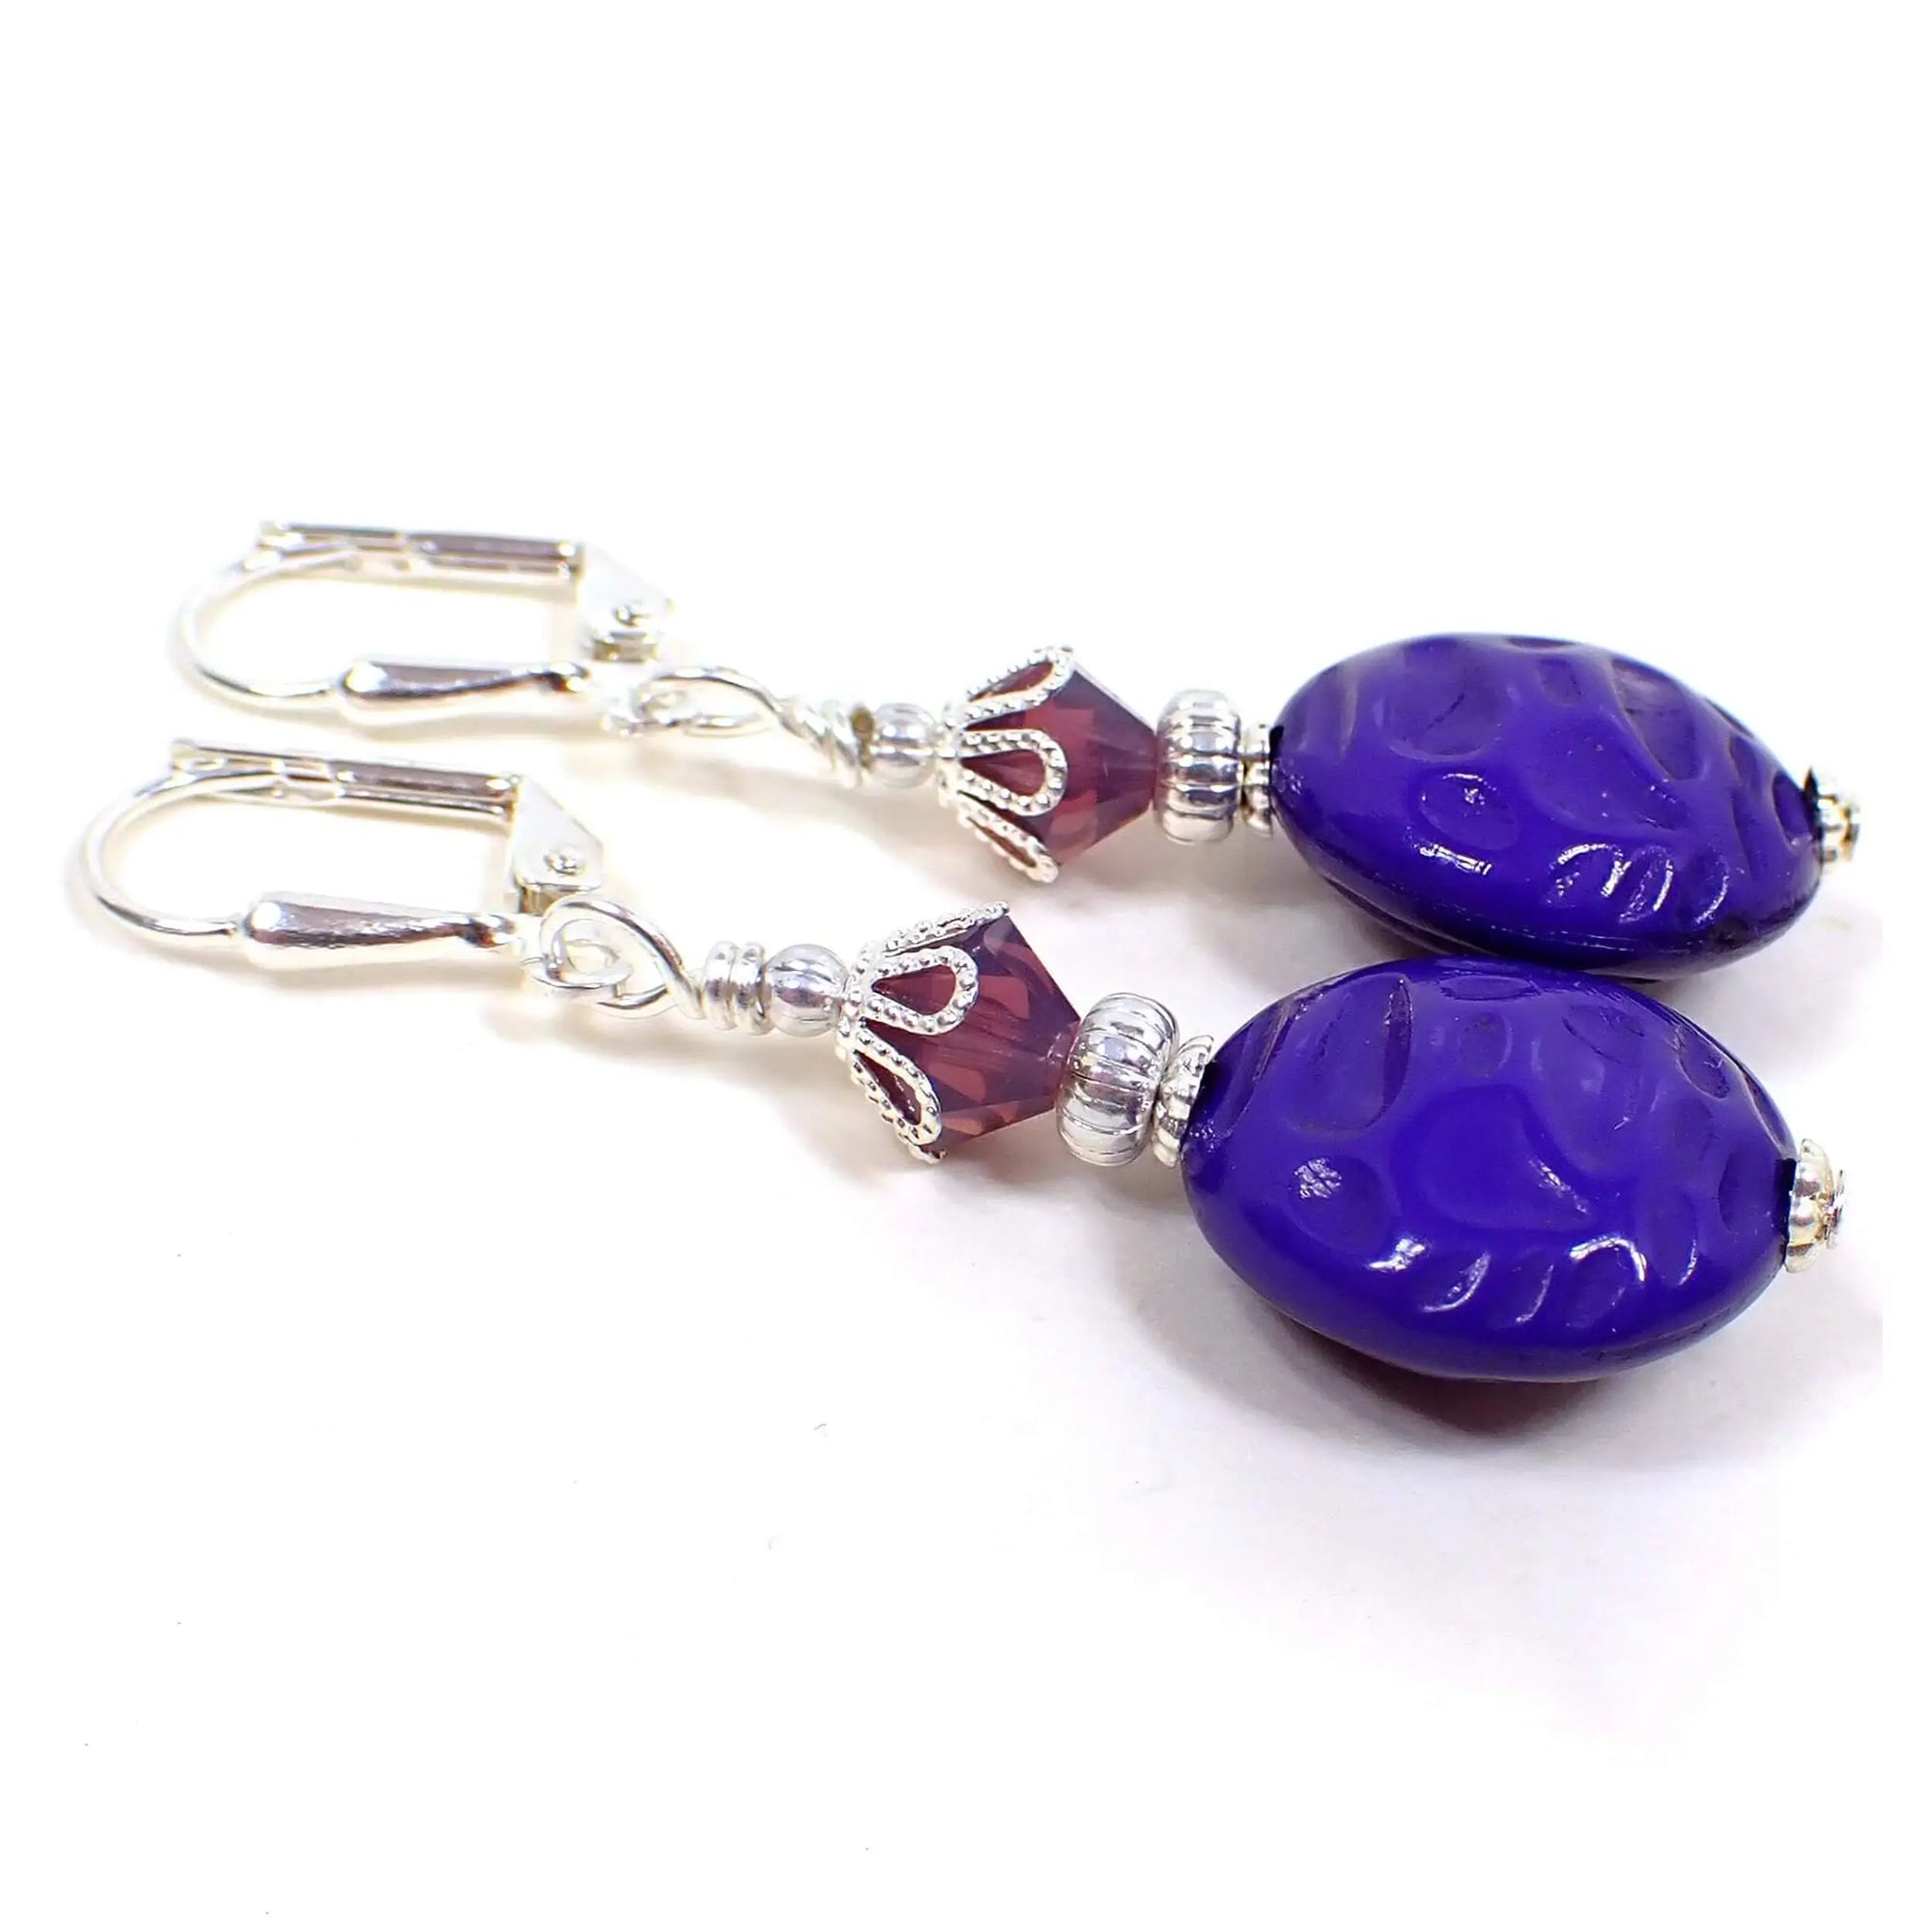 Side view of the handmade drop earrings. The metal is silver plated in color. There are purple semi translucent faceted glass crystal beads at the top. The bottom beads are vintage lucite beads that are puffy round shaped with an indented pattern and are a bright bluish purple in color.